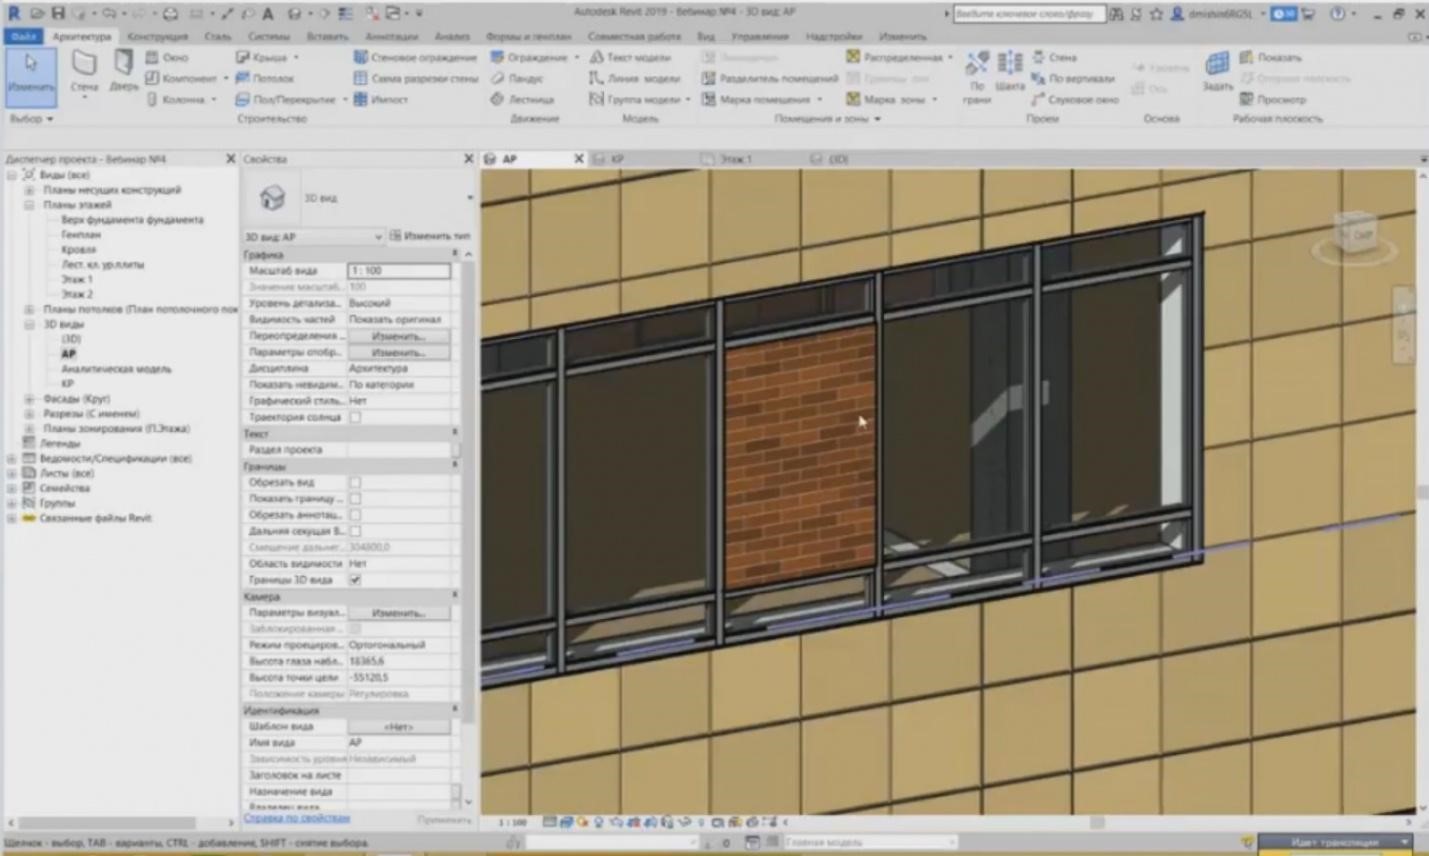 BIM DESIGN IN REVIT. CREATING ARCHITECTURAL AND STRUCTURAL ELEMENTS. PAGE 2-27